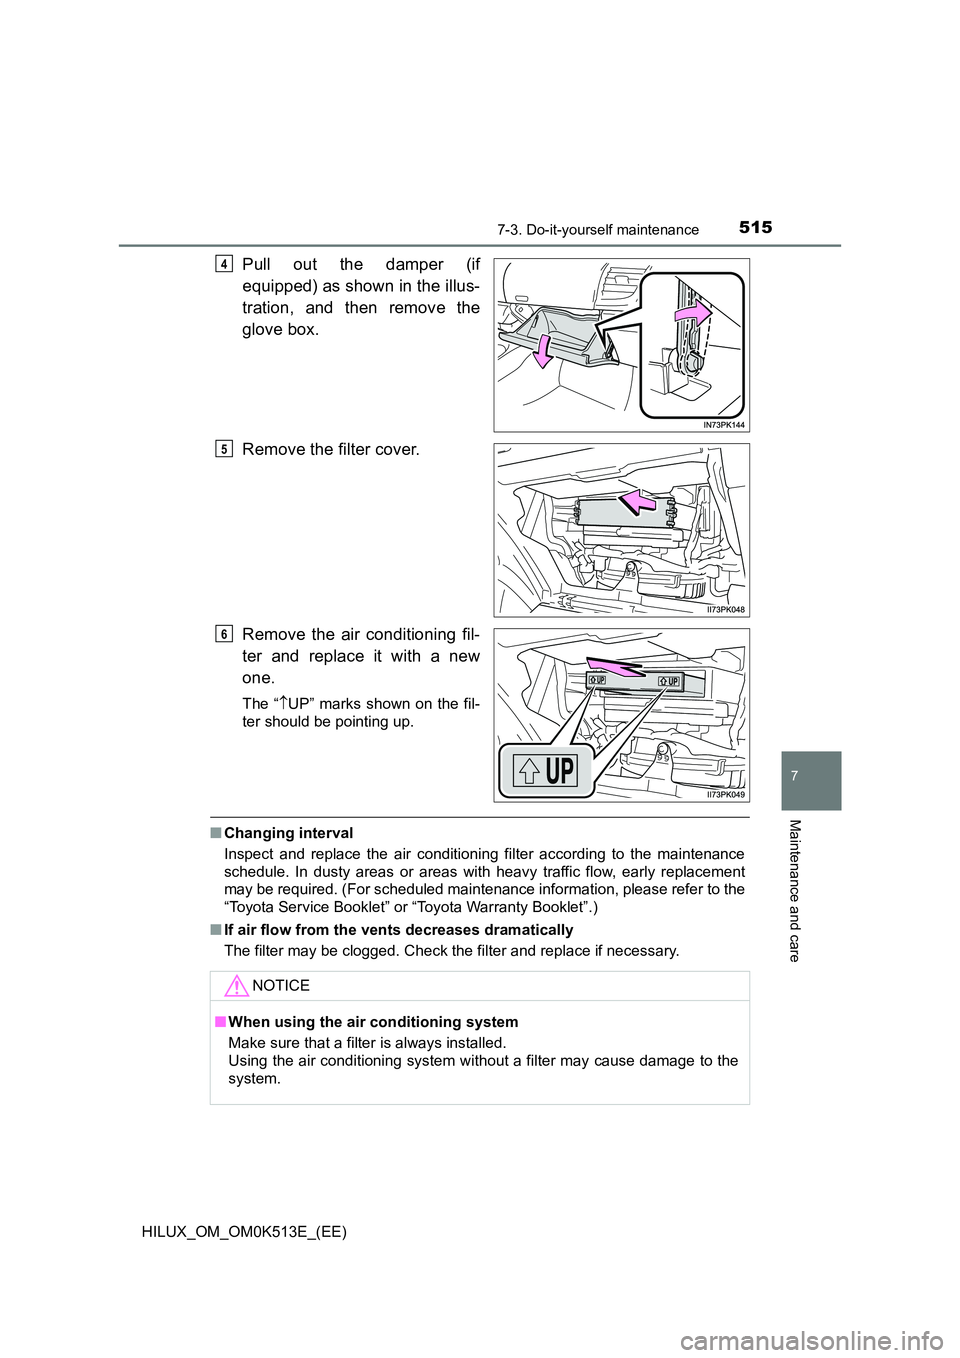 TOYOTA HILUX 2022  Owners Manual 5157-3. Do-it-yourself maintenance
HILUX_OM_OM0K513E_(EE)
7
Maintenance and care
Pull out the damper (if 
equipped) as shown in the illus- 
tration, and then remove the 
glove box. 
Remove the filter 